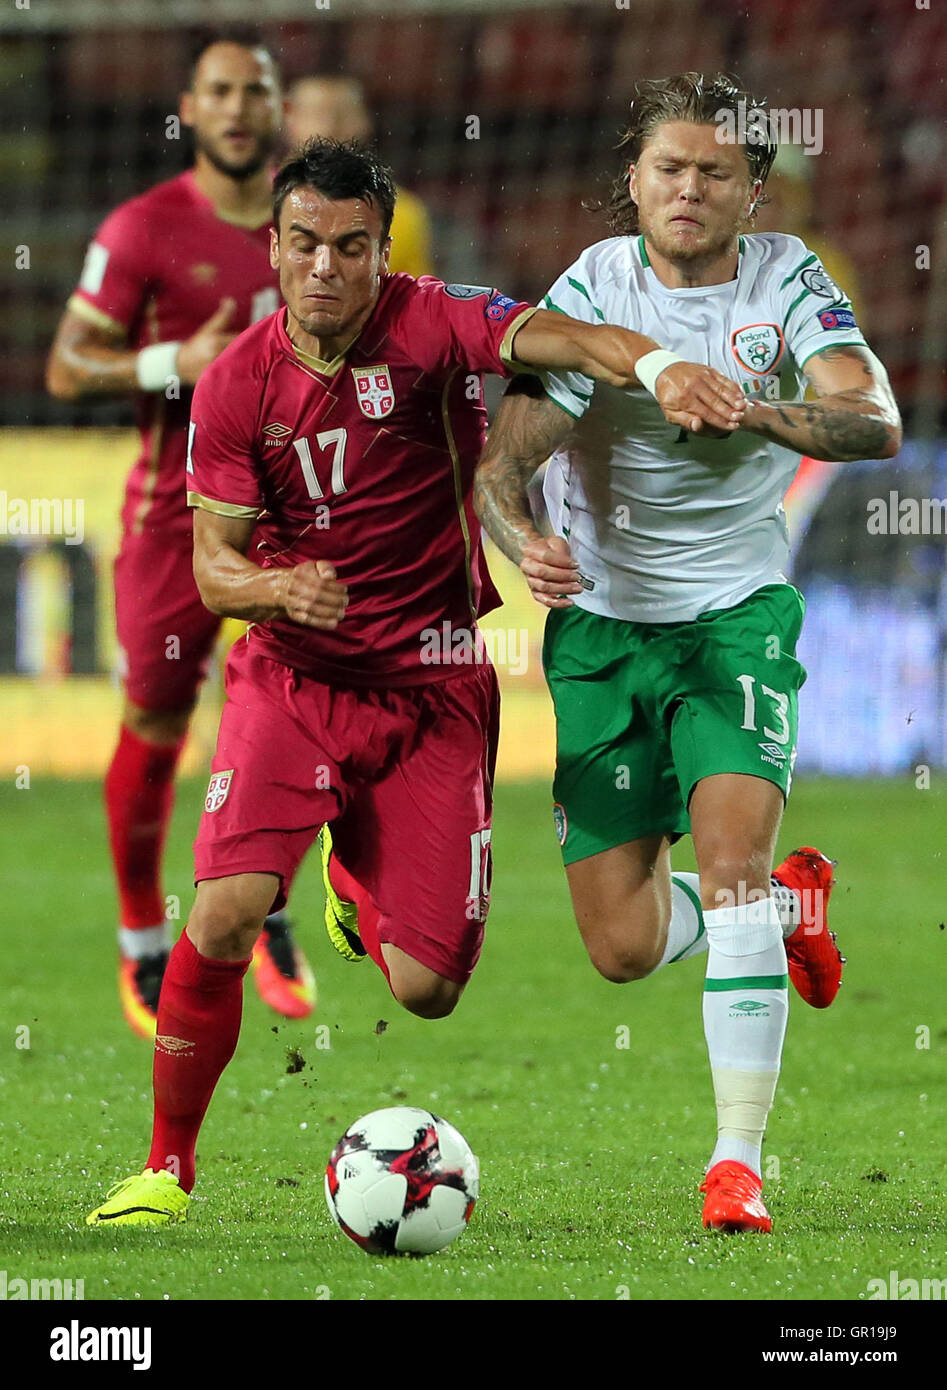 Belgrade, Serbia. 5th Sep, 2016. Serbia's Filip Kostic (L) vies with Republic of Ireland's Jeff Hendrick during the World Cup 2018 football qualification match between Serbia and Republic of Ireland in Belgrade, Serbia, on Sept. 5, 2016. The game ended with a 2-2 draw. © Predrag Milosavljevic/Xinhua/Alamy Live News Stock Photo